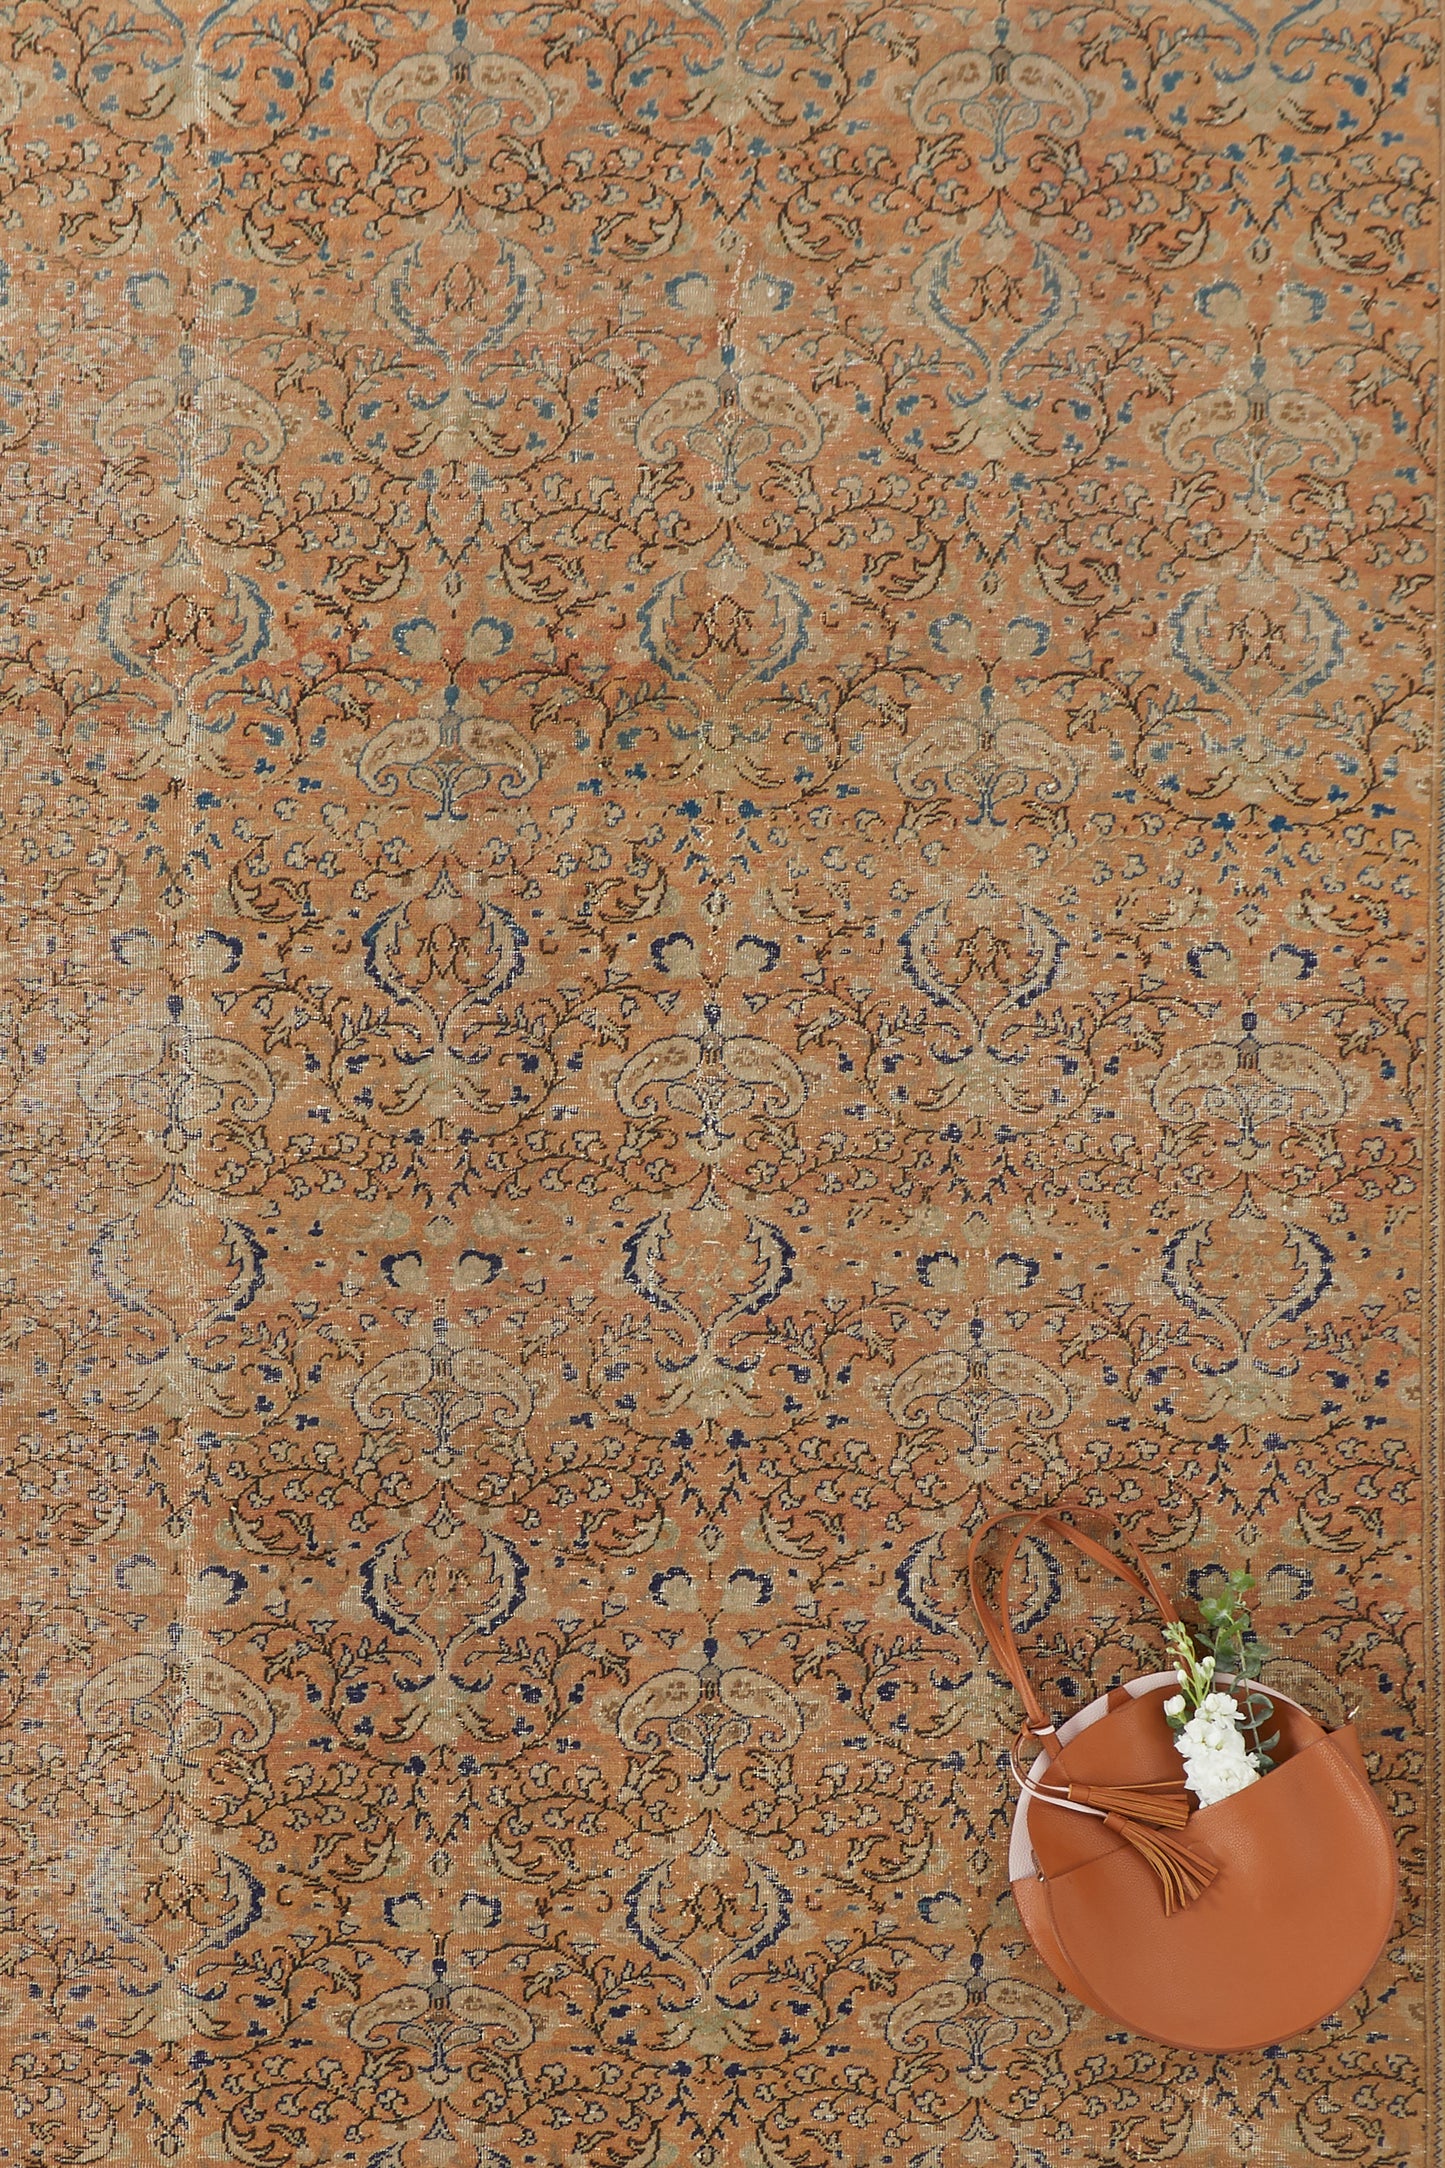 
                  
                    'Capricorn' Turkish Vintage Area Rug - 7'4" x 11'8" - Canary Lane - Curated Textiles
                  
                